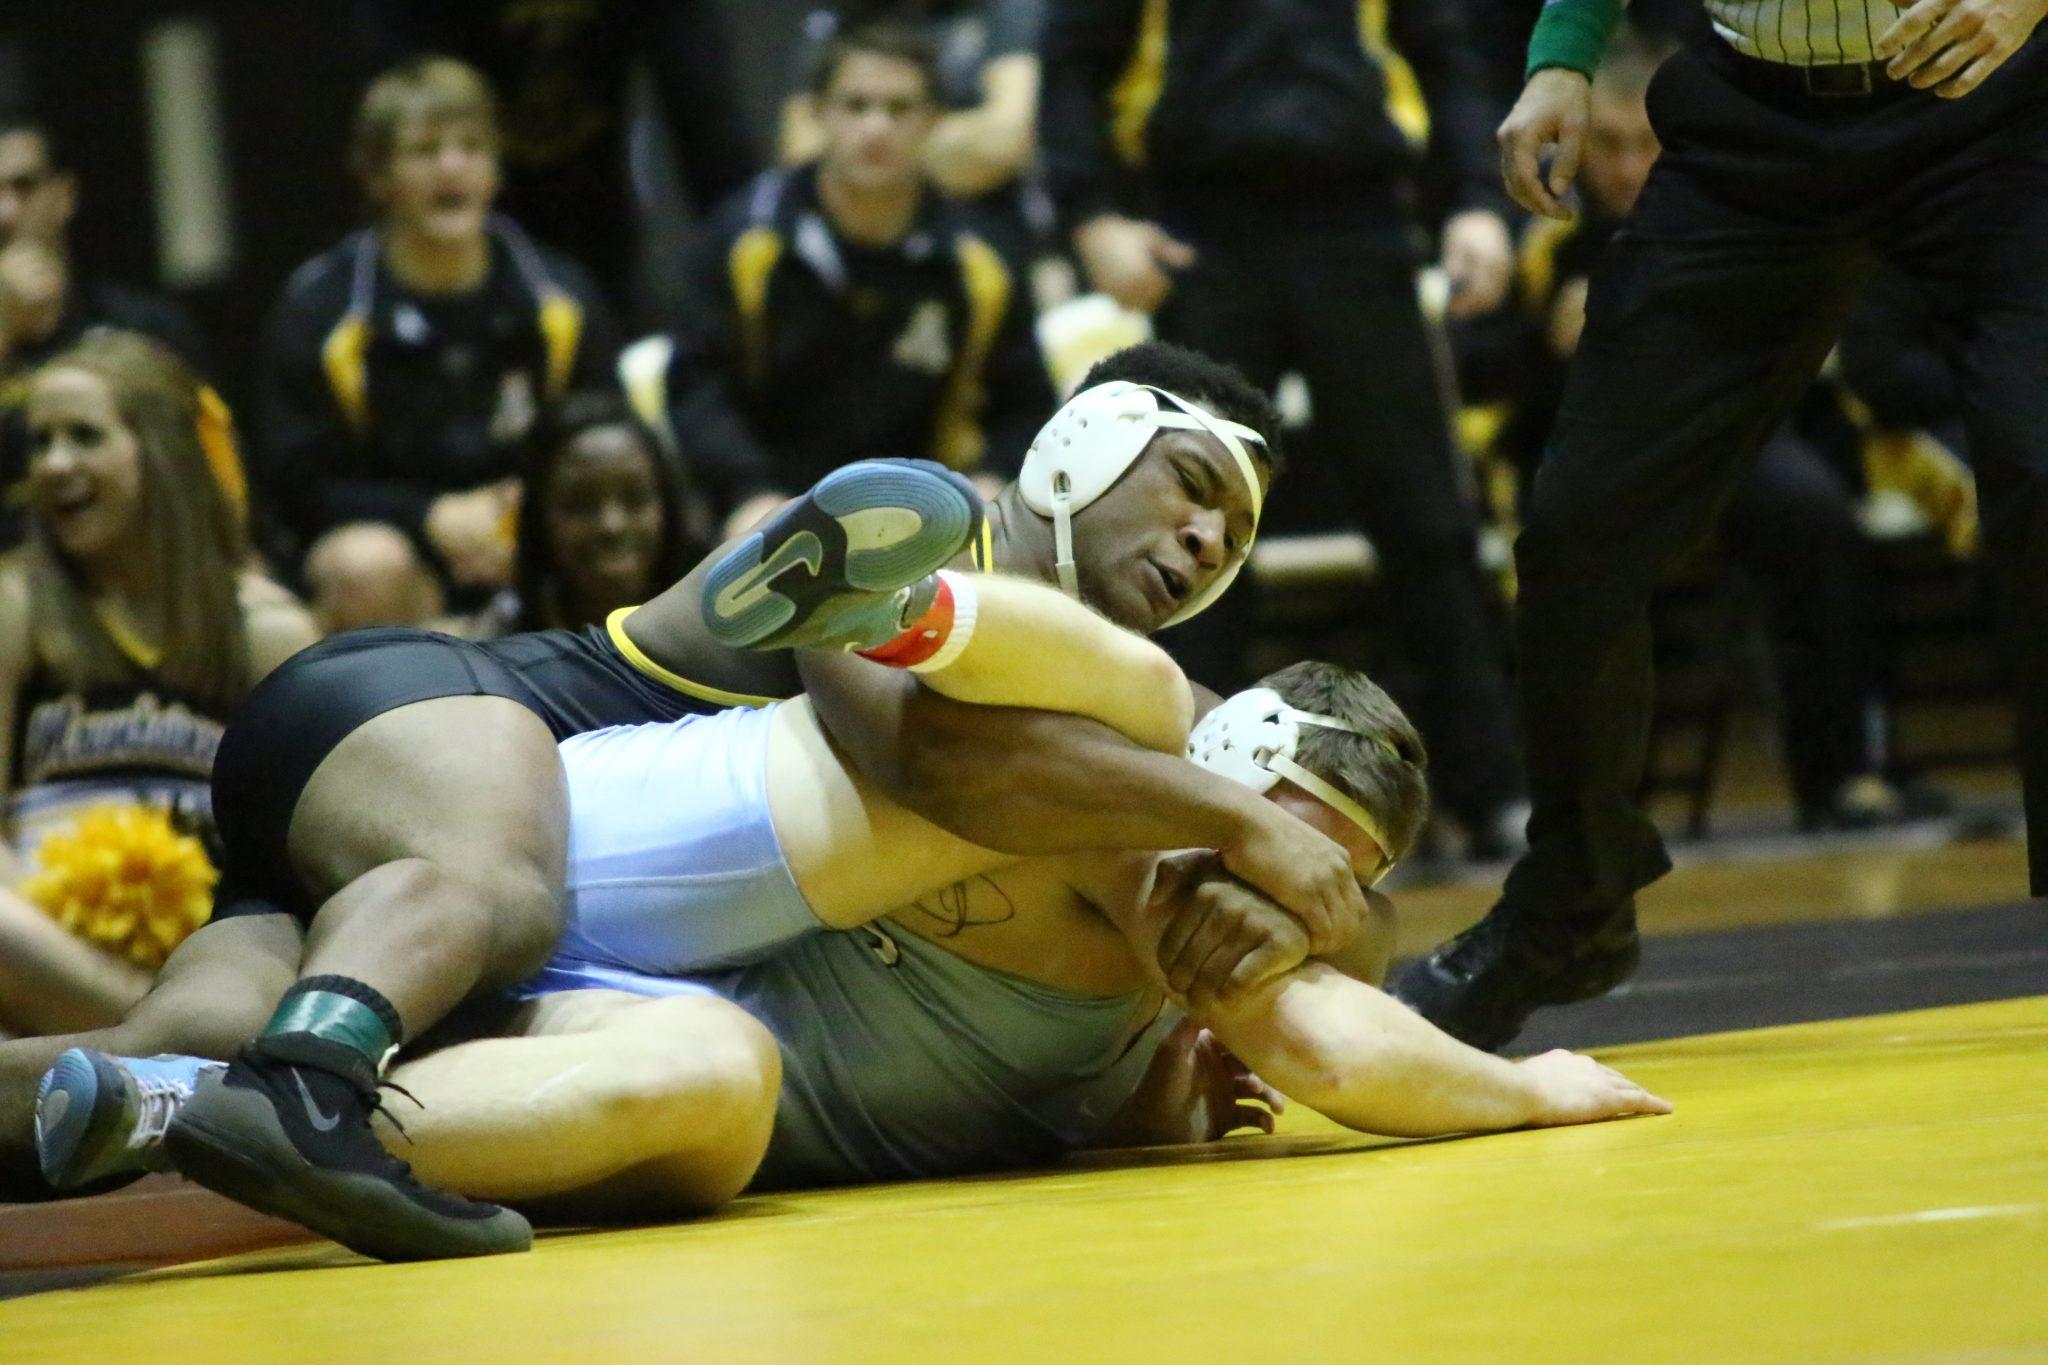 Denzel Dejournette won the final match to help the Mountaineers defeat the Tarheels
Photo courtesy: App State Athletics/ Rob Moore